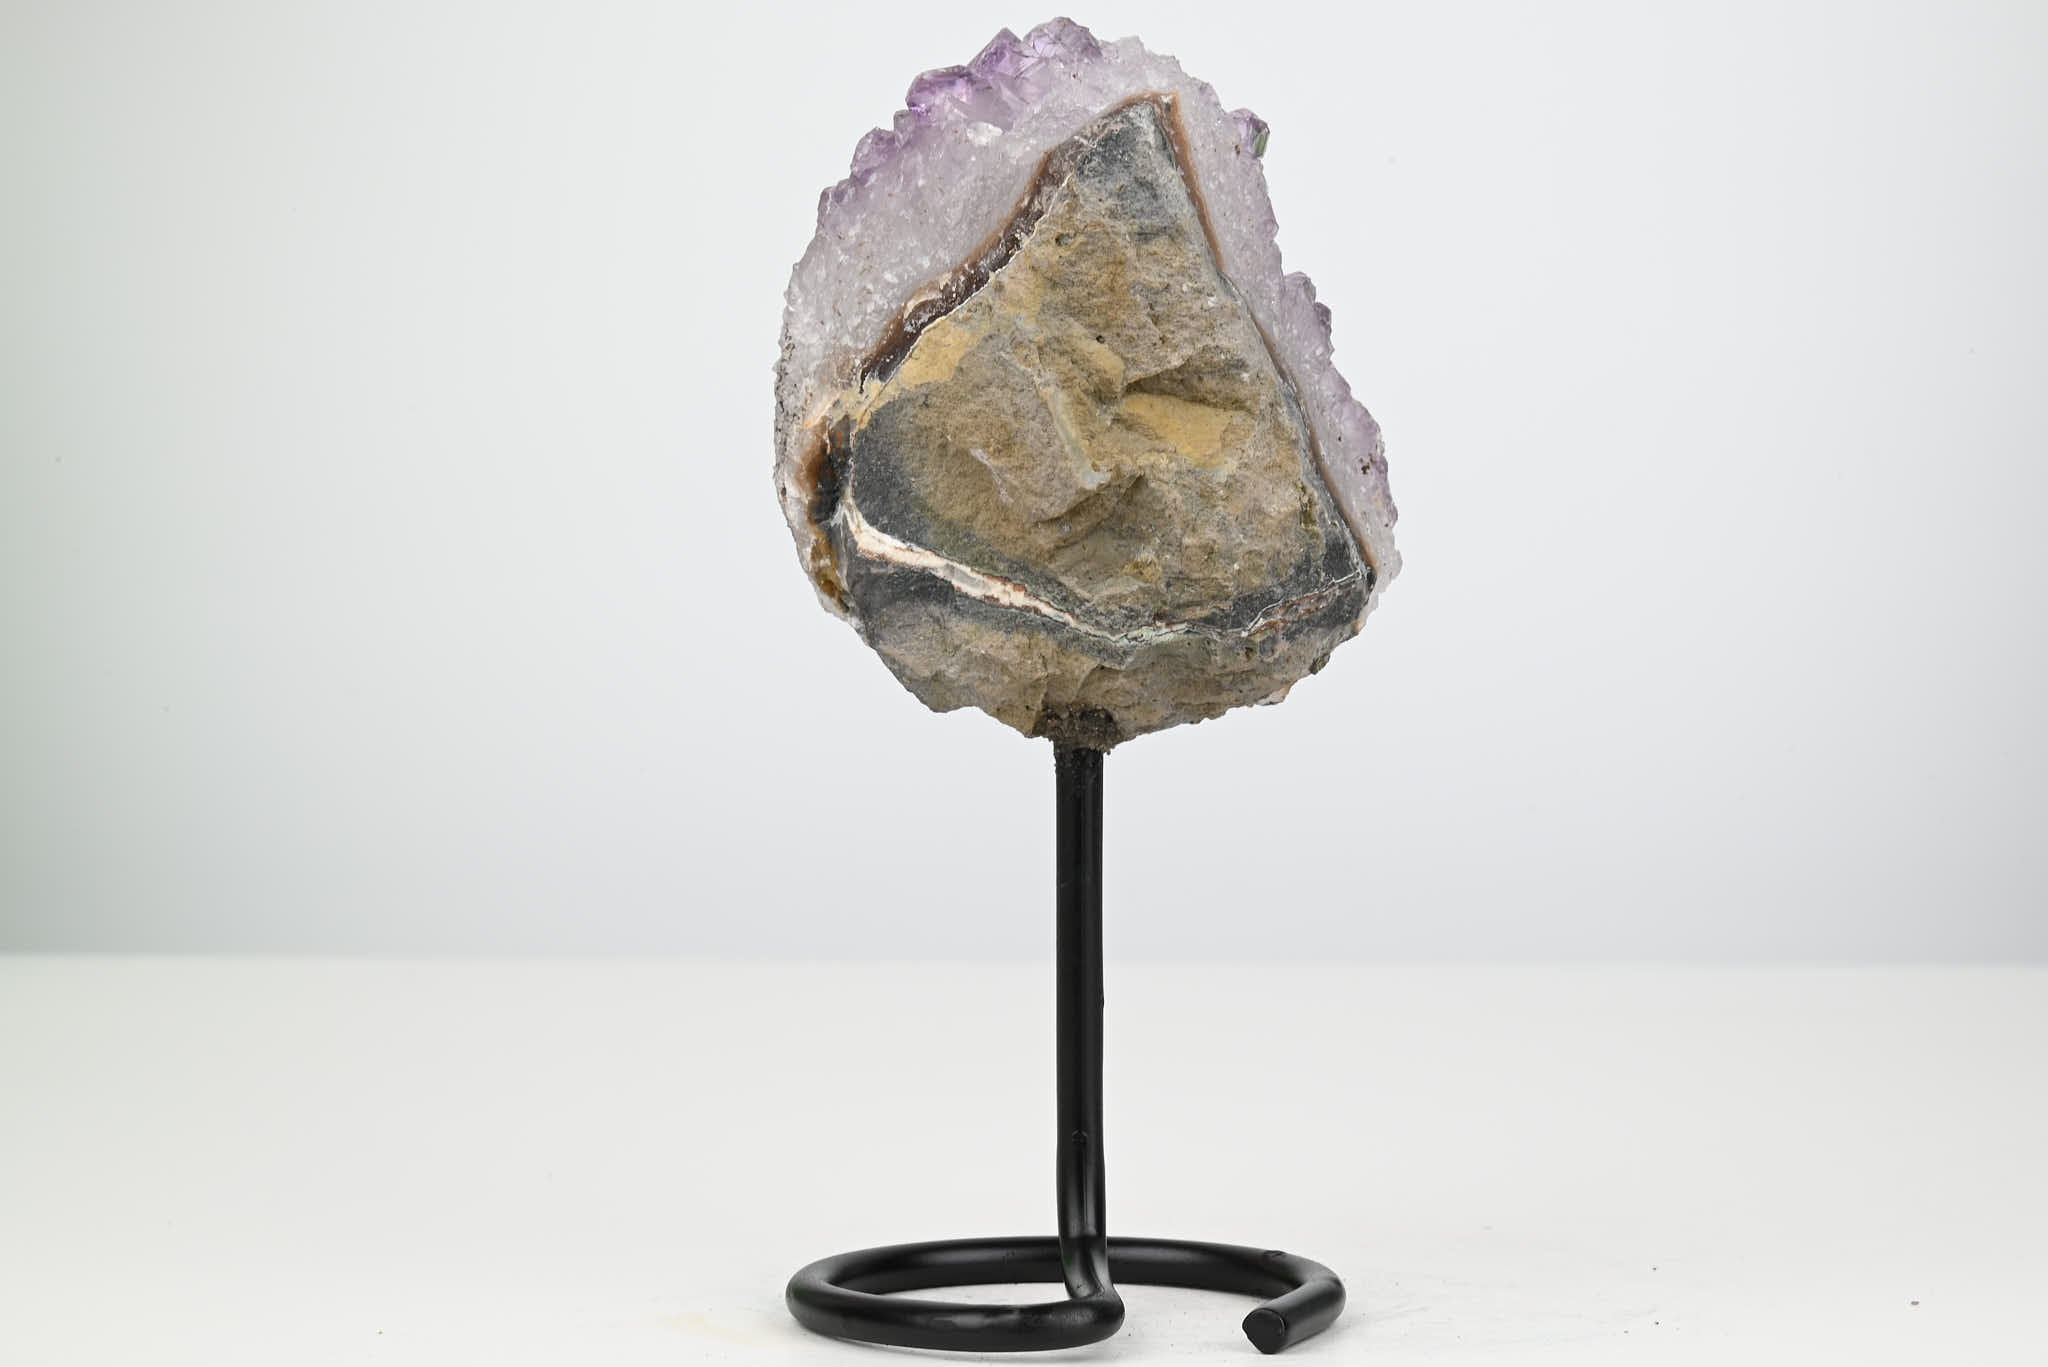 Amethyst Cluster on Stand - Small 15cm Tall - #CLUSAM-63031